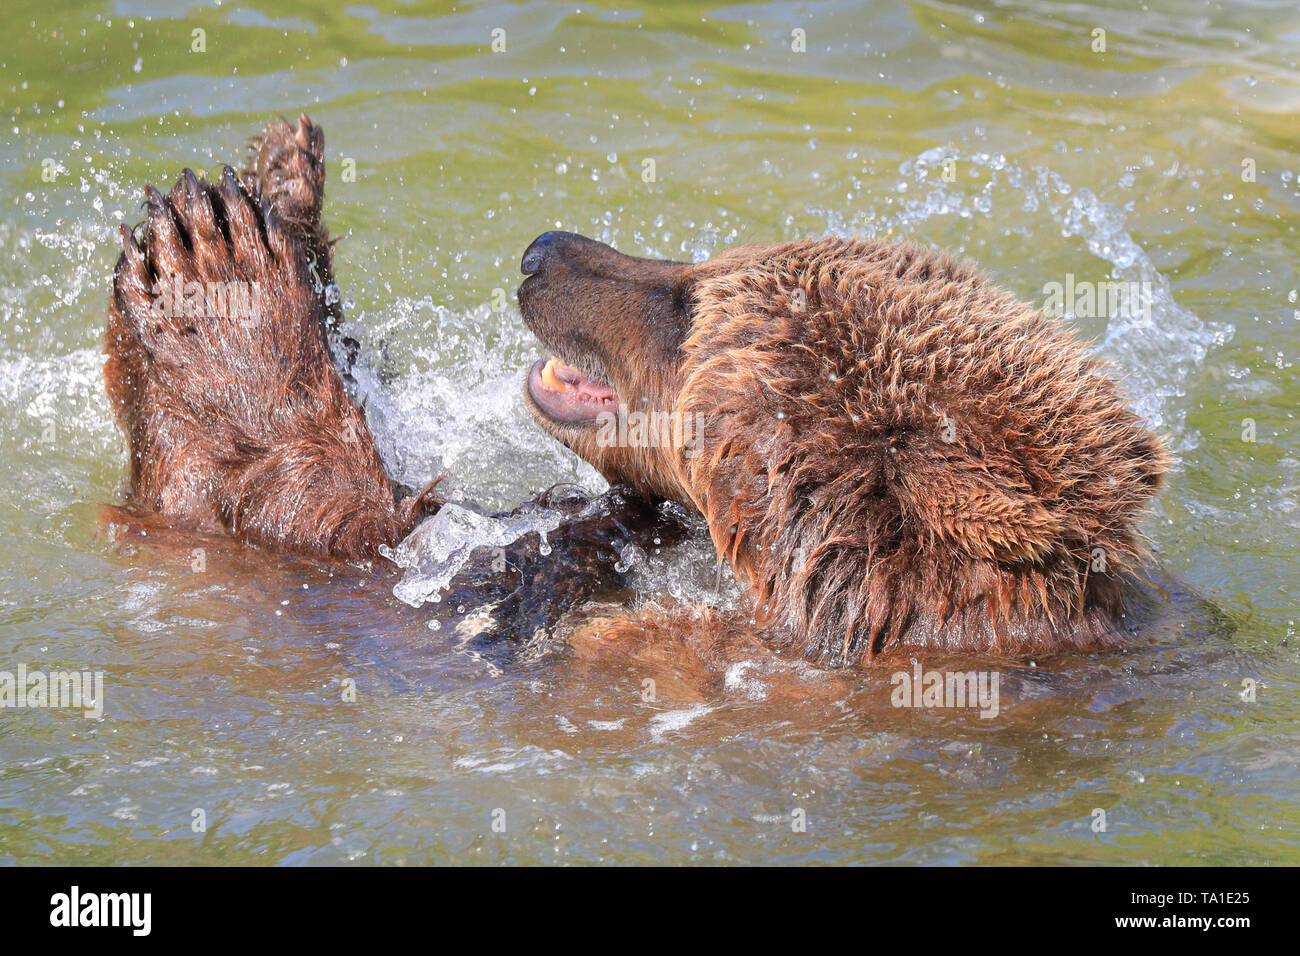 Whipsnade, UK, 21st May 2019. Eurasian brown bear lady 'Cinderella', one of three female brown bears resident at ZSL Whipsnade Zoo, has lots of fun splashing about with enrichment balls, coconuts and a rag and animal skin in the enclosure's pool whilst enjoying the warm afternoon sunshine in the South East. Credit: Imageplotter/Alamy Live News Stock Photo